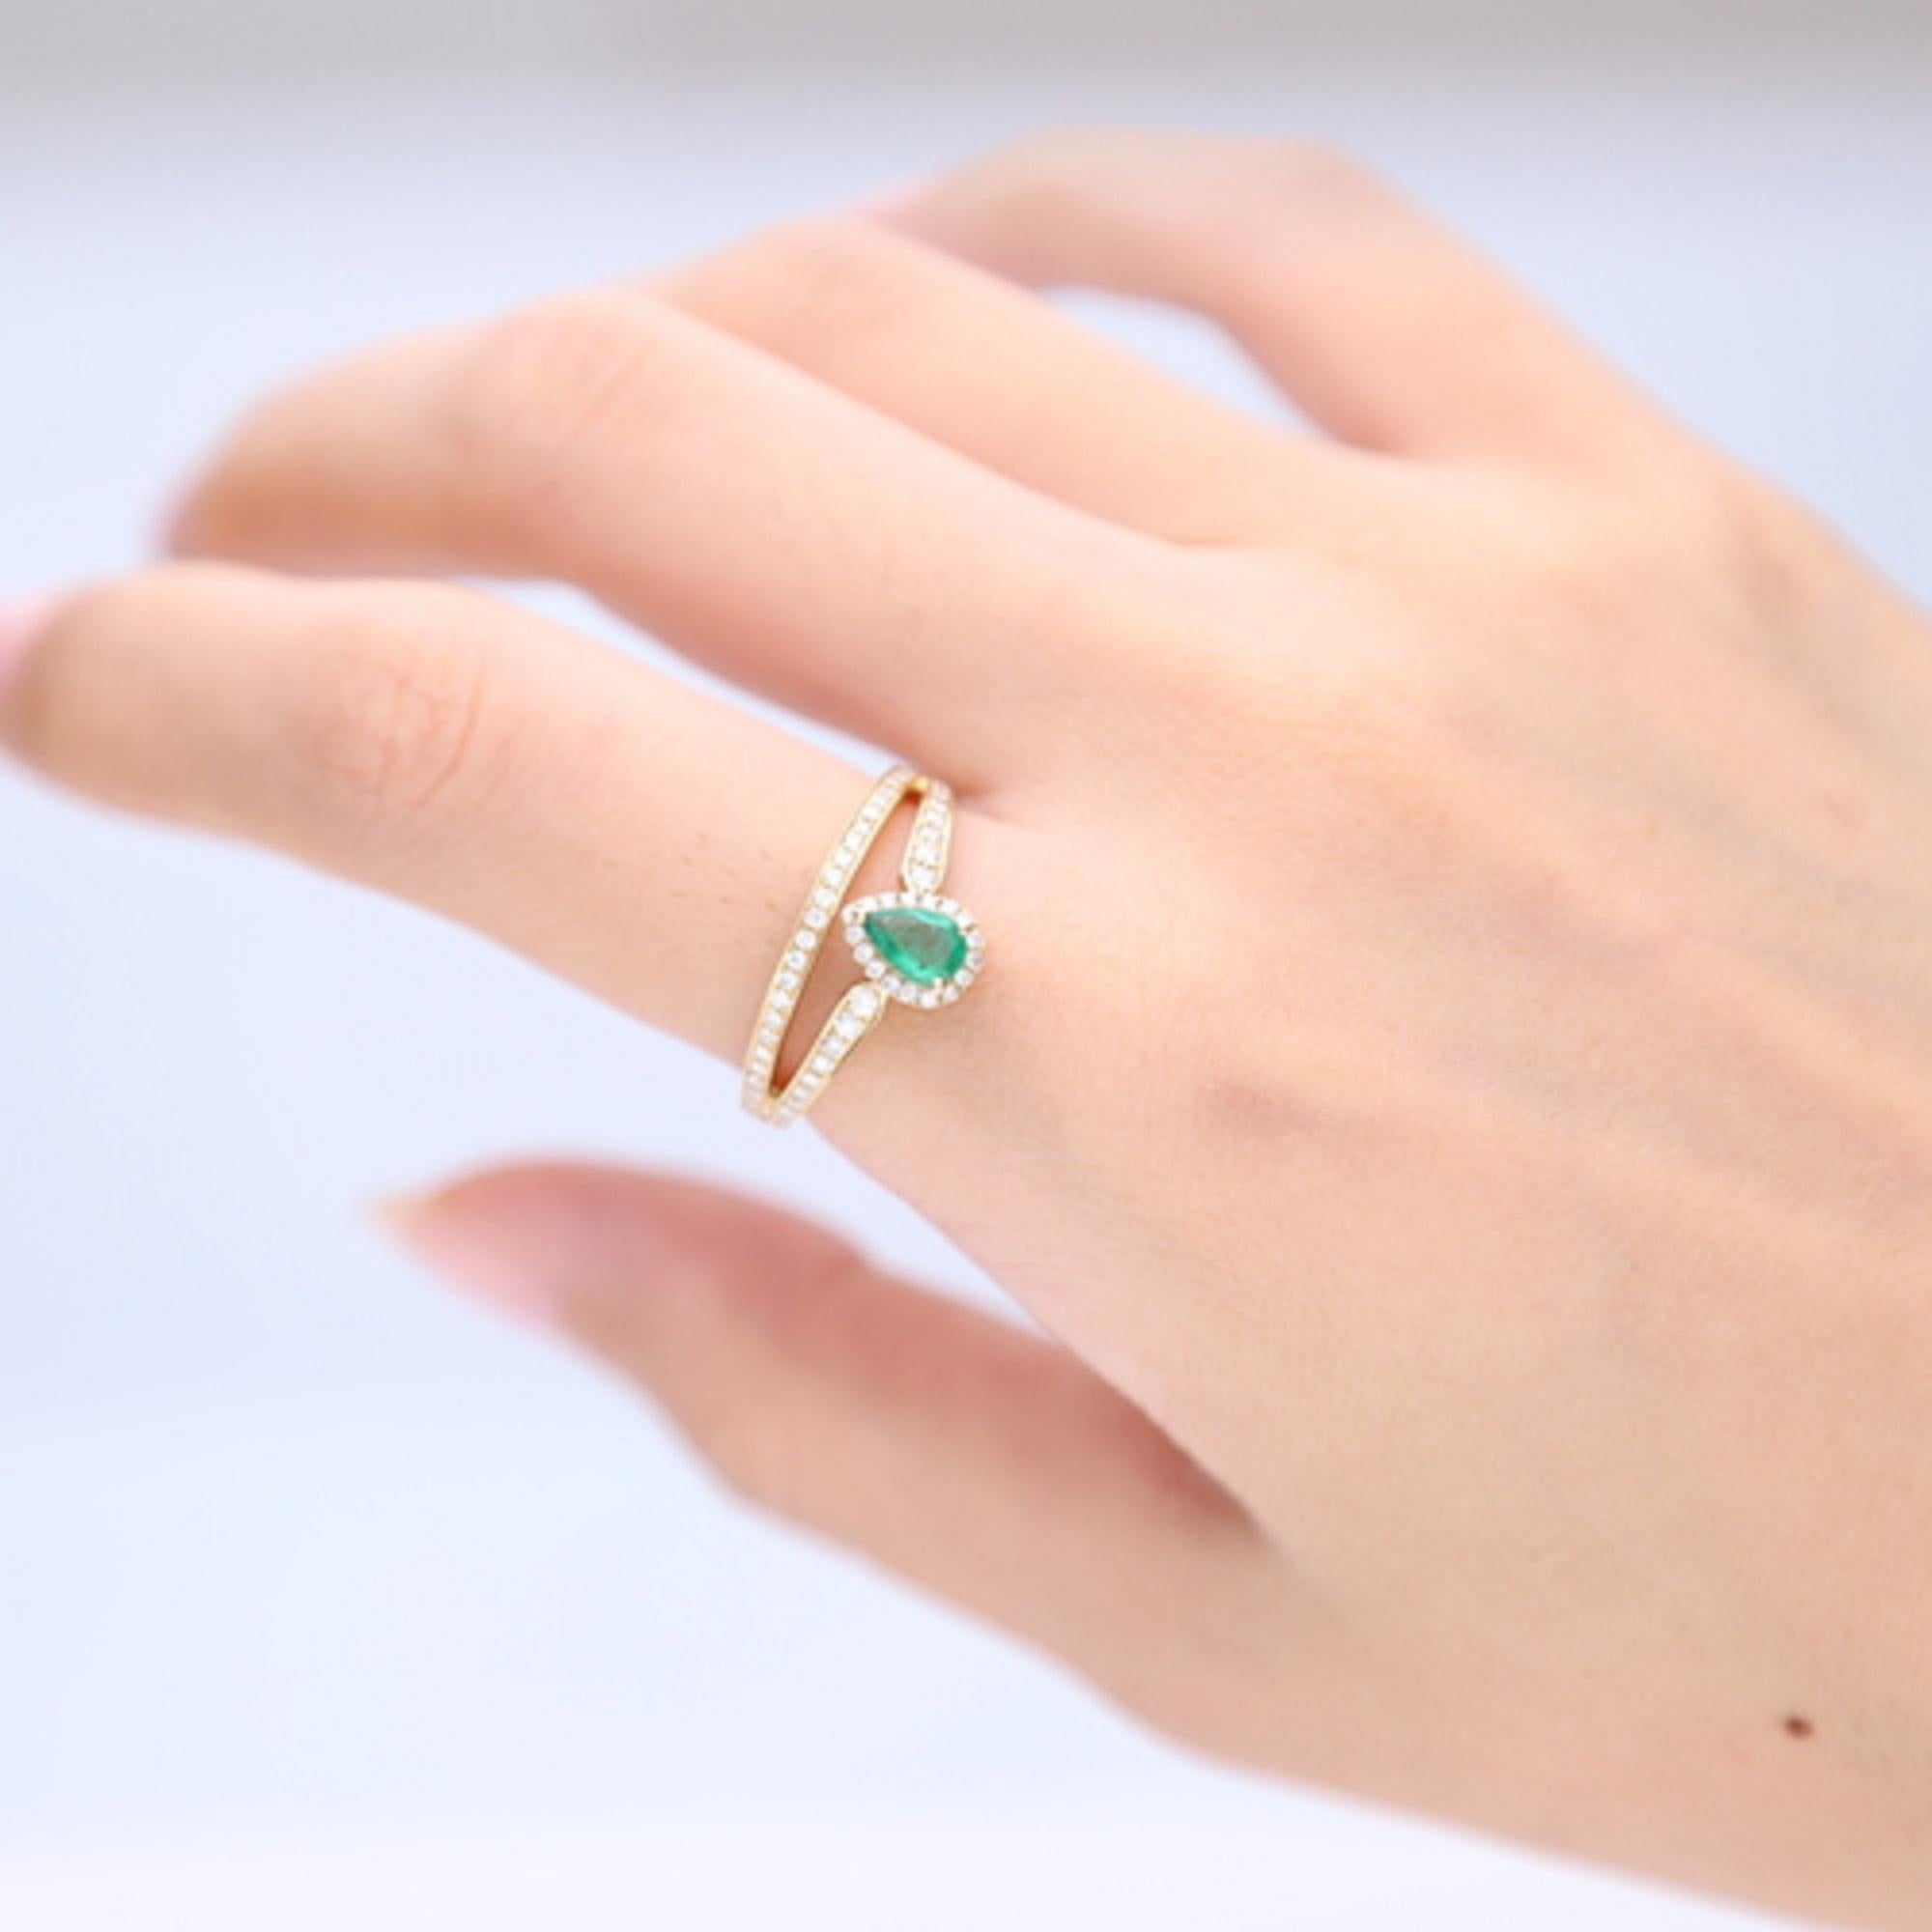 Stunning, timeless and classy eternity Unique Ring. Decorate yourself in luxury with this Gin & Grace Ring. The 14k Yellow Gold jewelry boasts Pear cut Prong Setting Natural Zambian Emerald (1 pcs) 0.32 Carat, along with Natural Round cut white